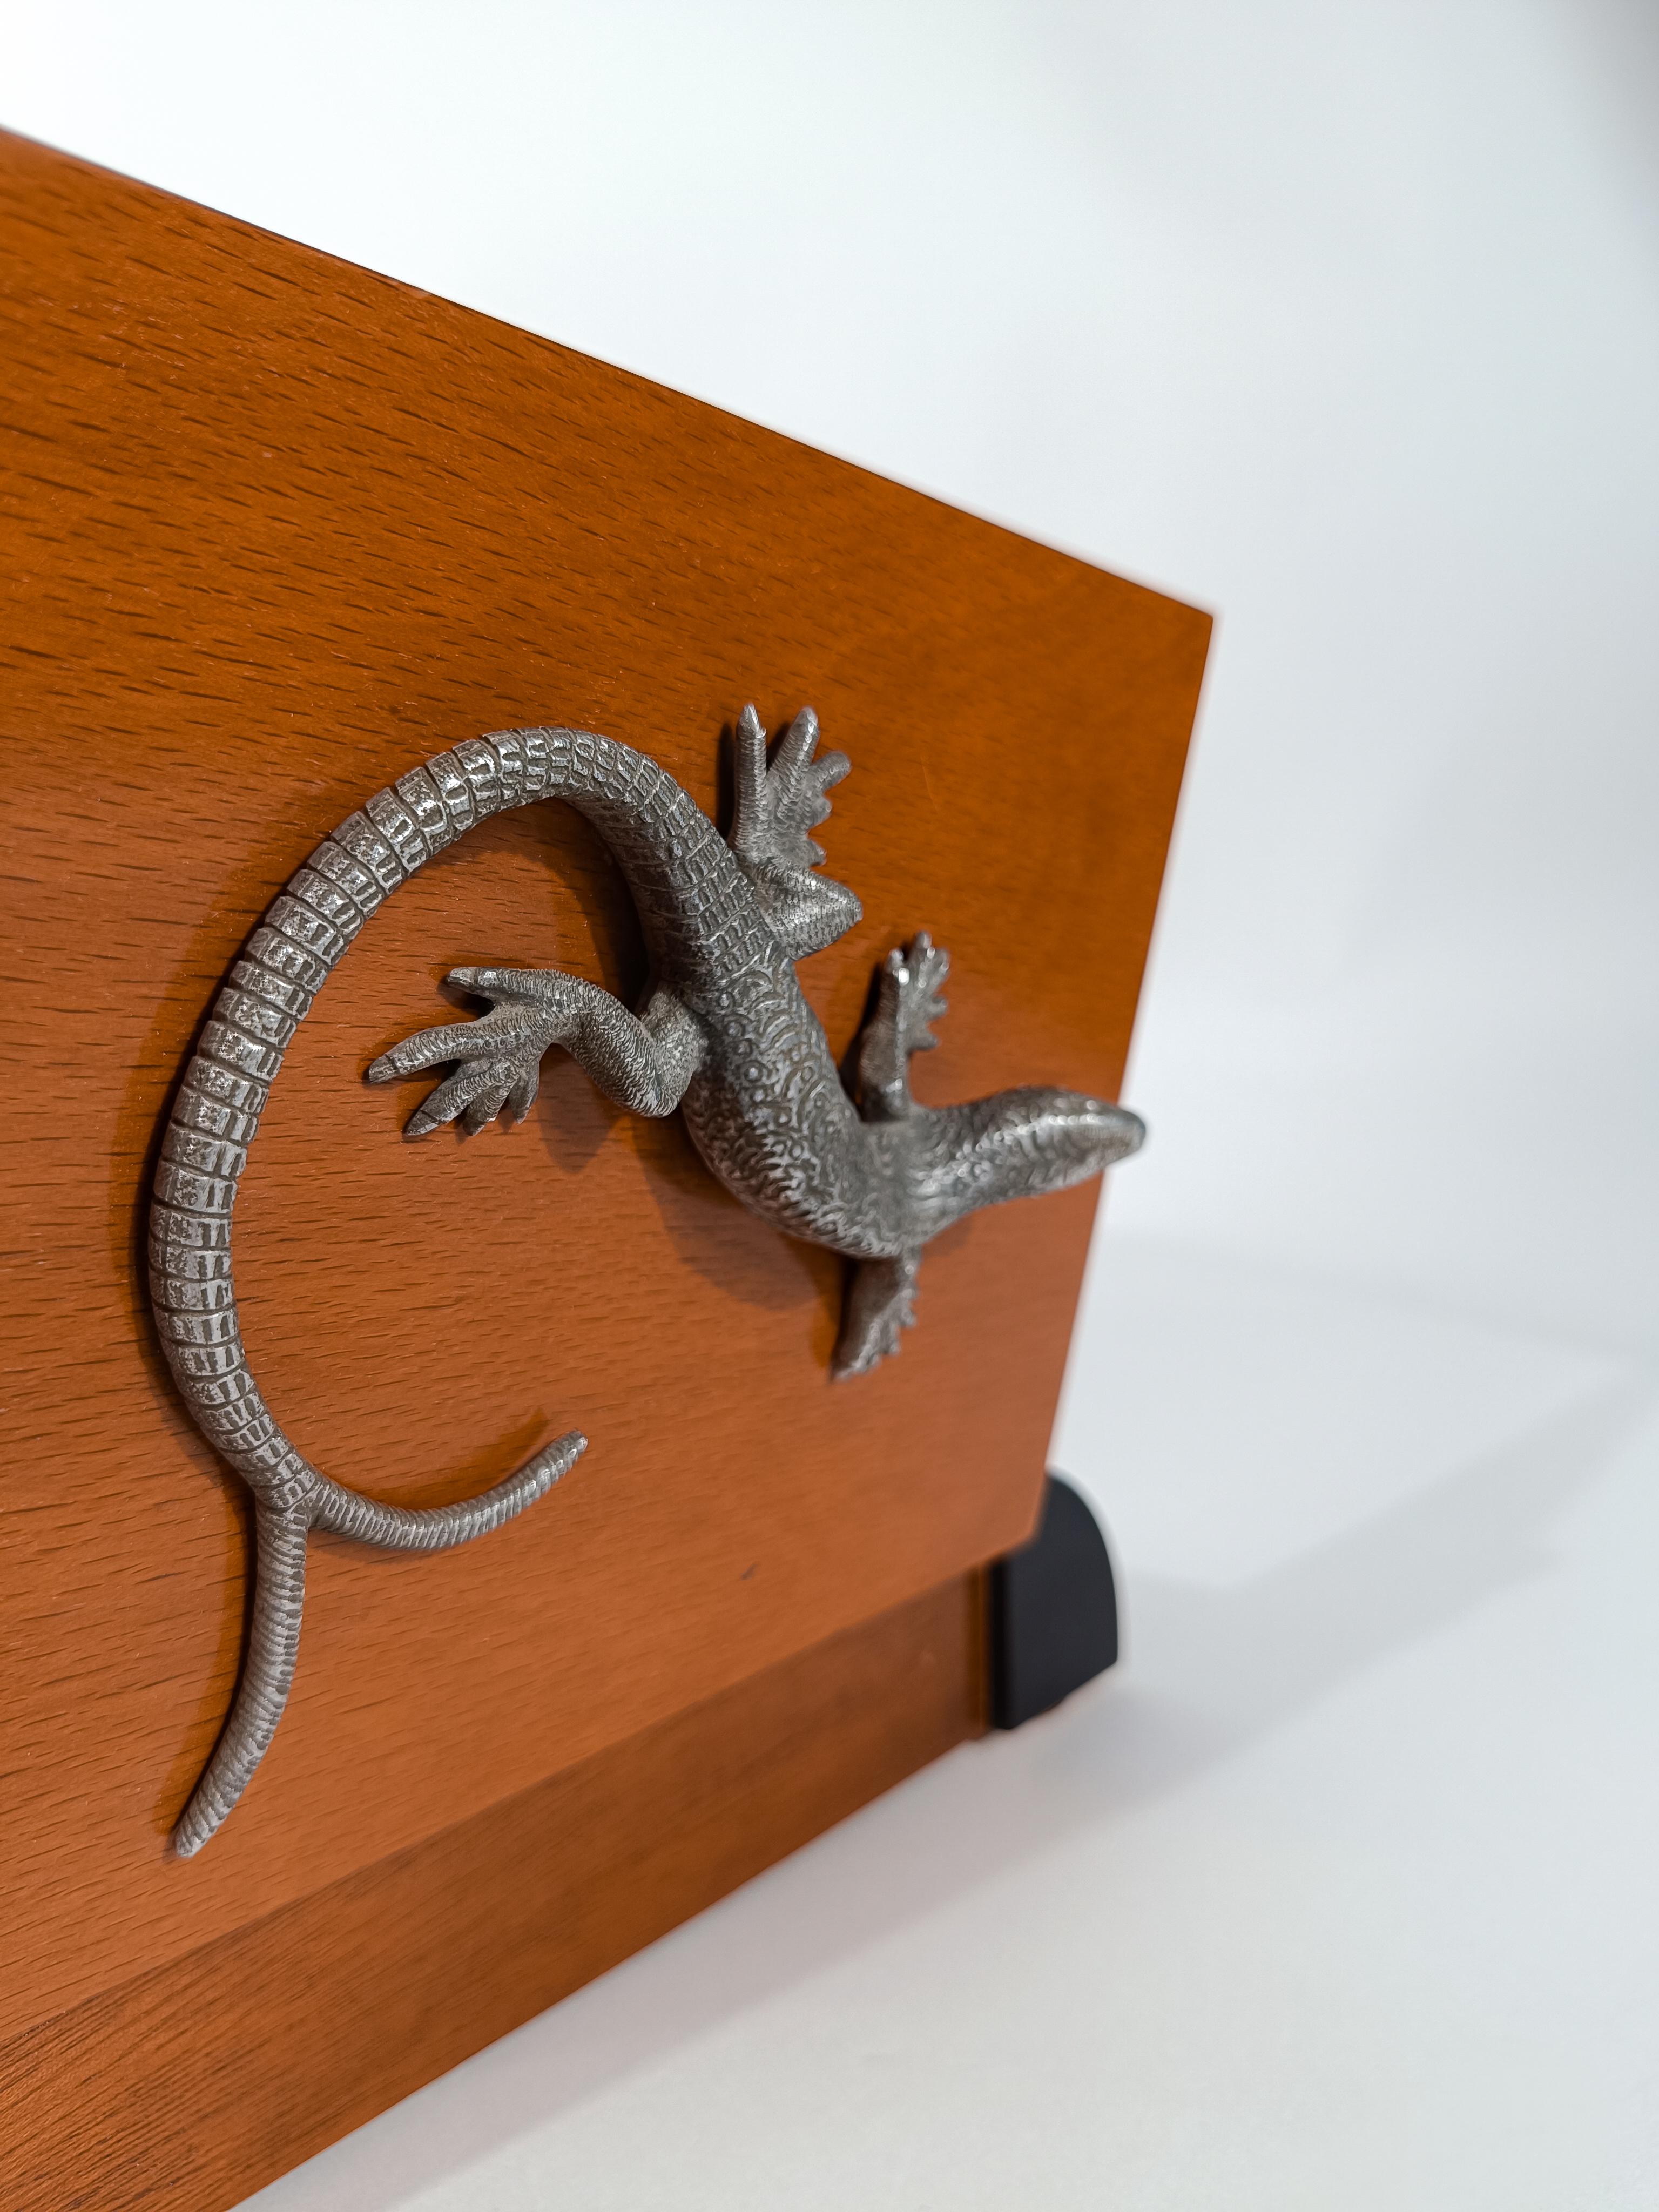 Art Deco wooden Box decorated with a Silver Tone Metal Lizard-shaped Handle For Sale 6